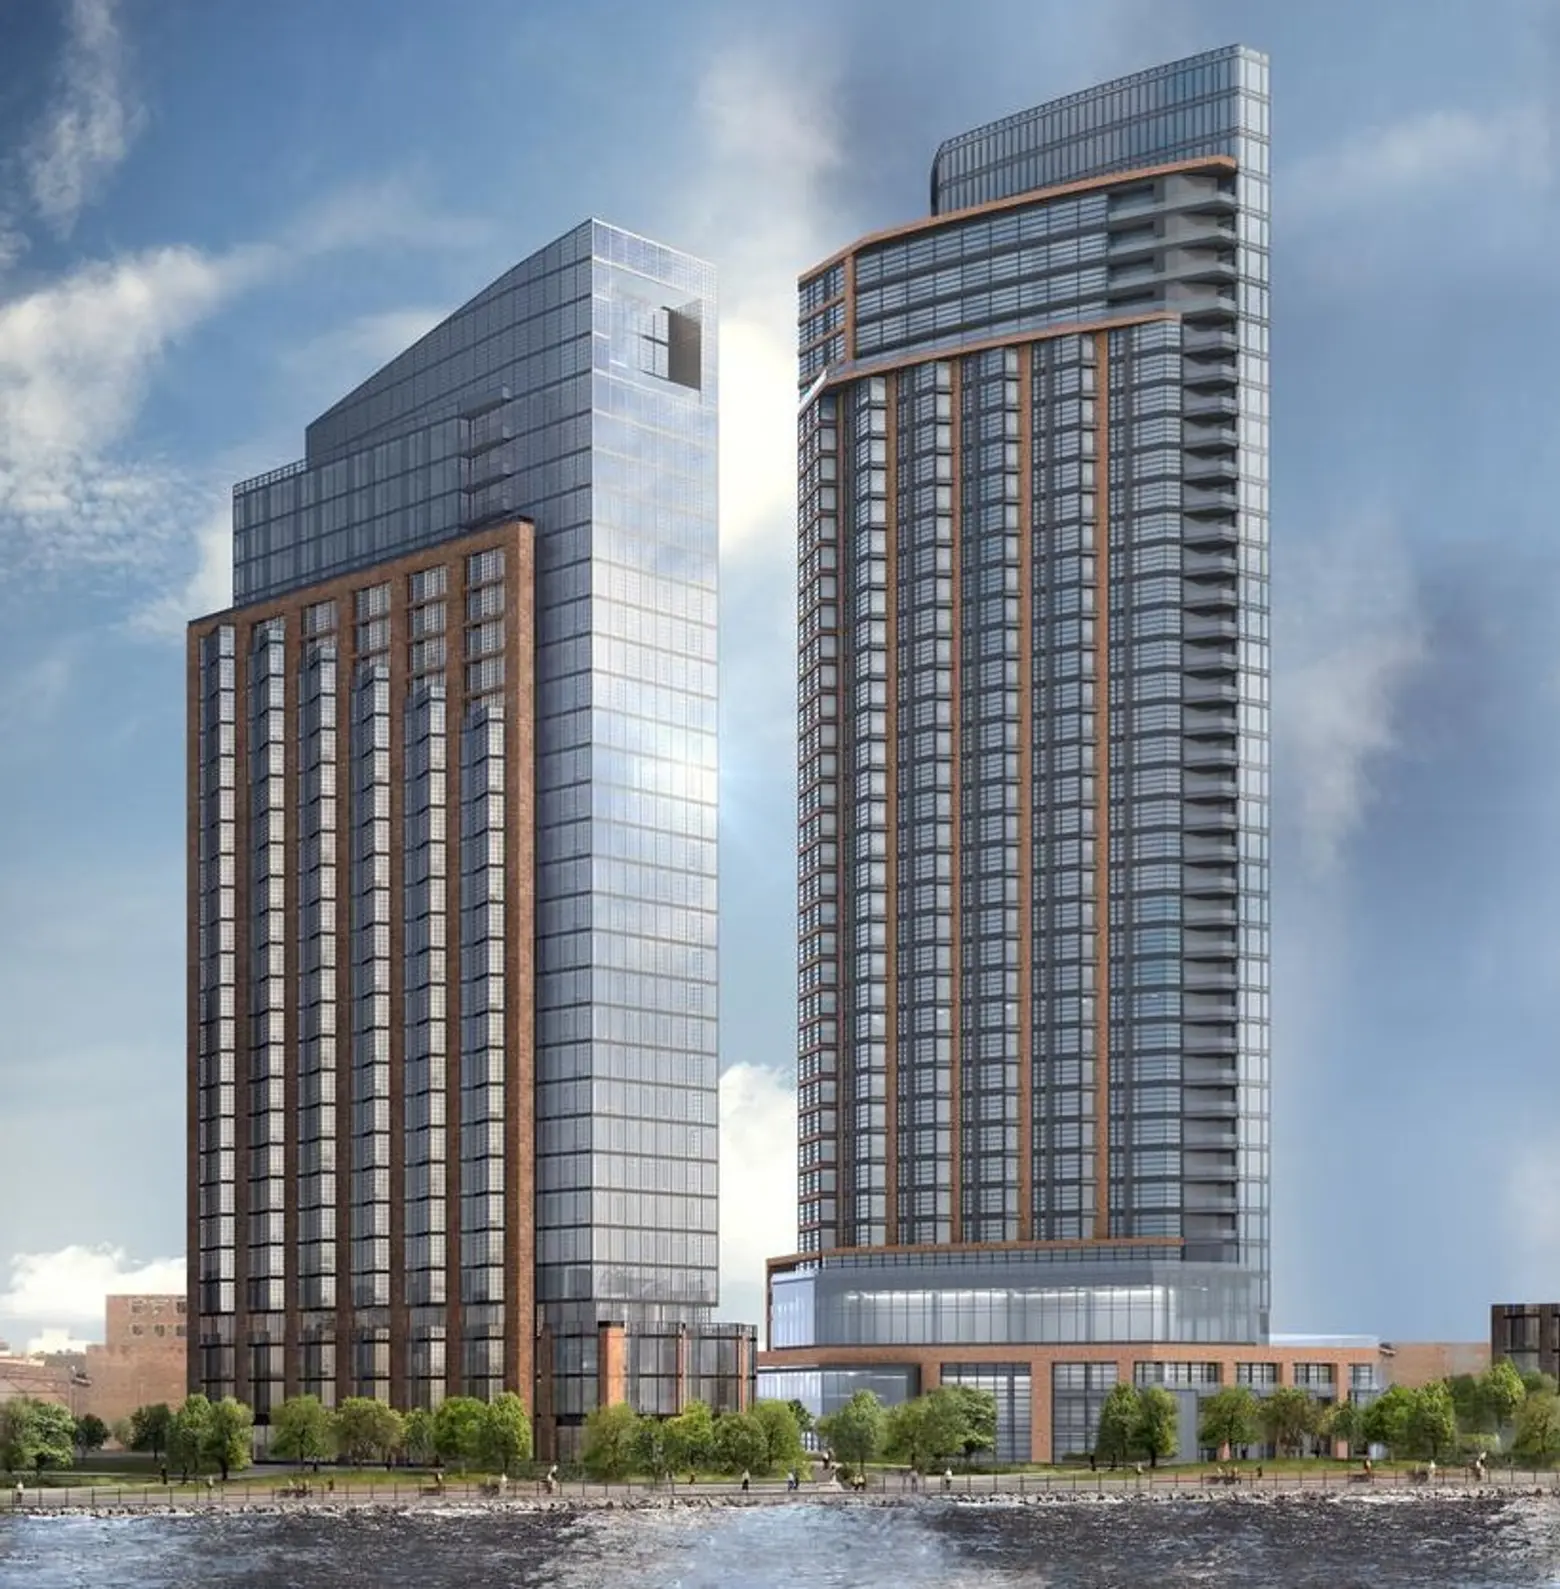 Two New Handel-Designed Towers to Sail Onto the Greenpoint Landing Waterfront